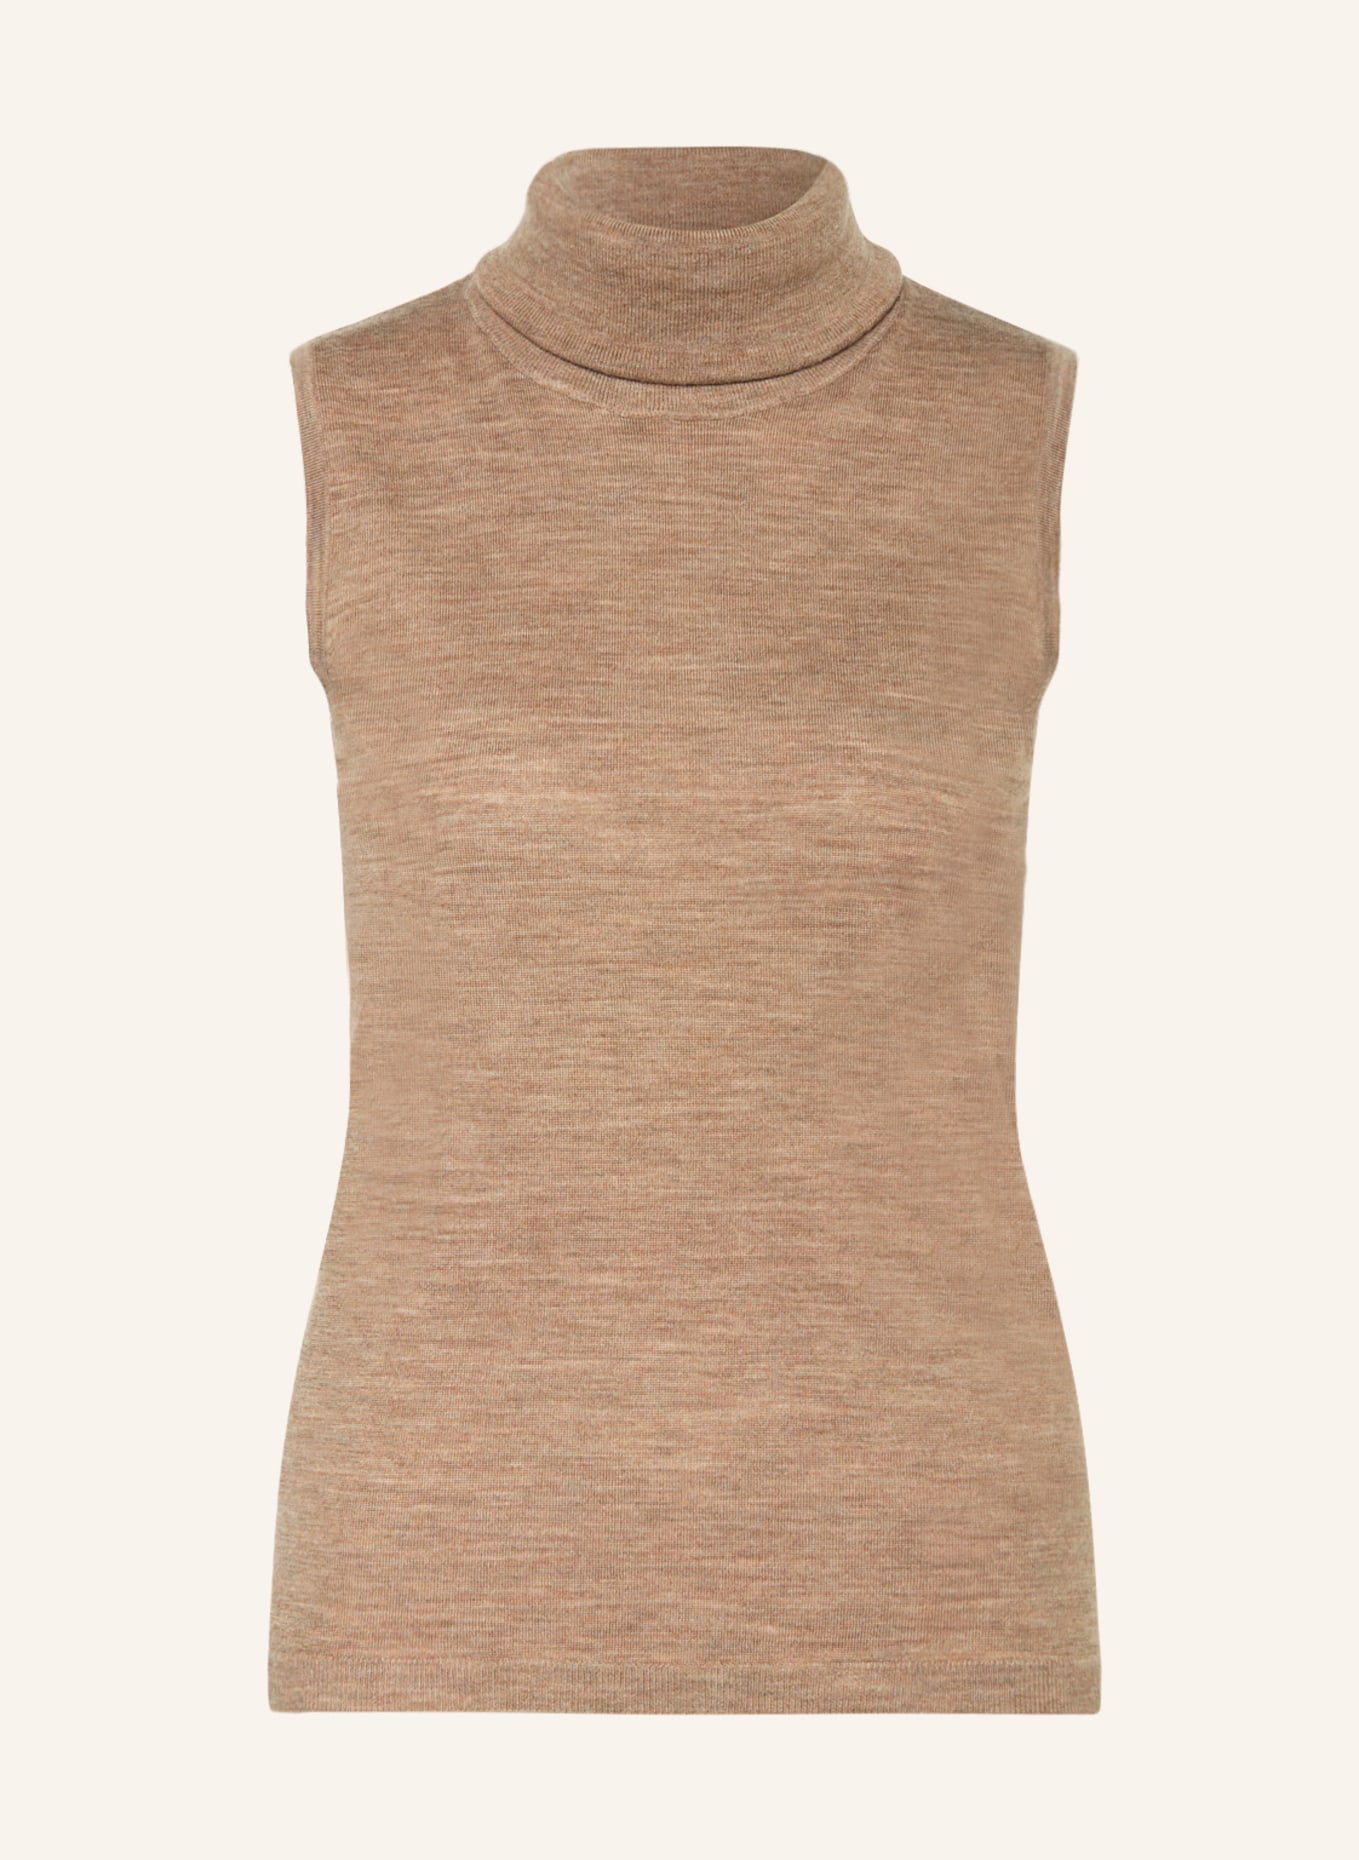 MRS & HUGS Sweater vest in merino wool, Color: TAUPE (Image 1)